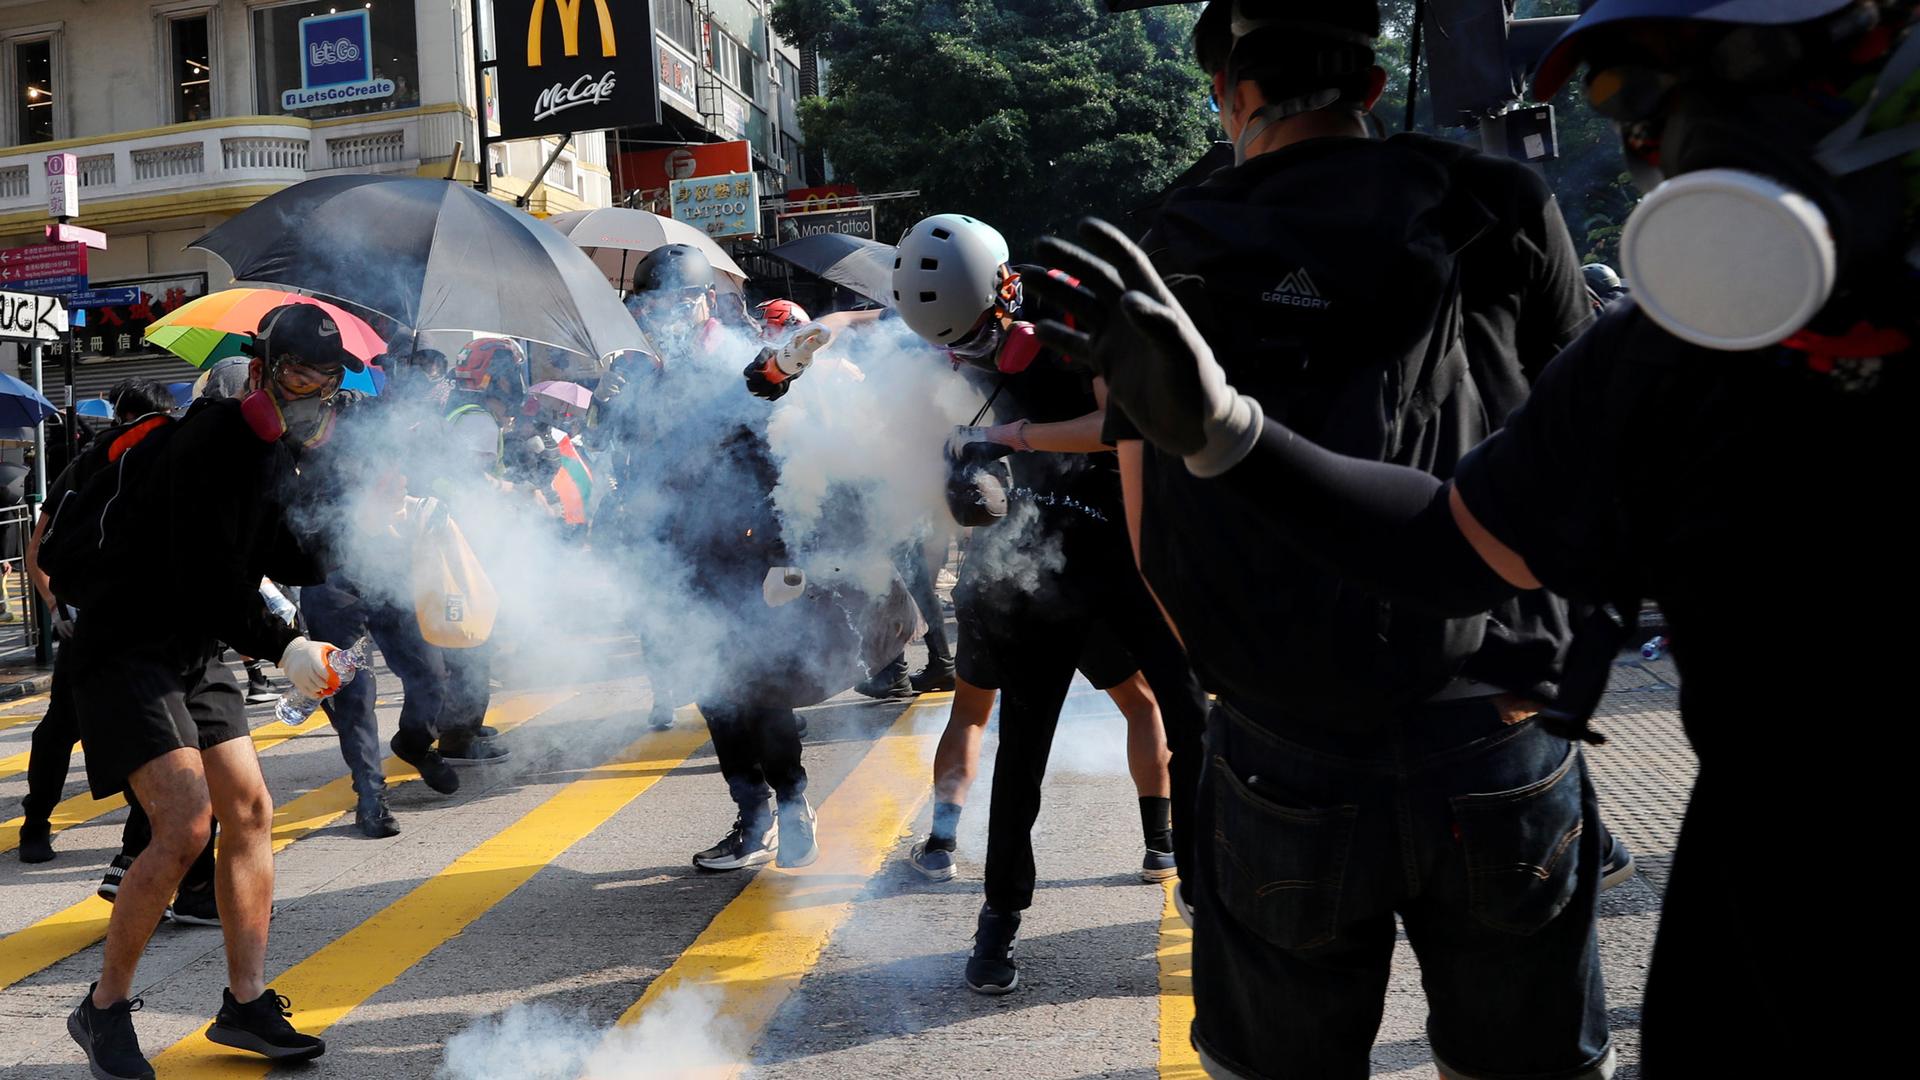 An anti-government protester hits by a tear gas canister during a protest march in Hong Kong, China, on Oct. 20, 2019.